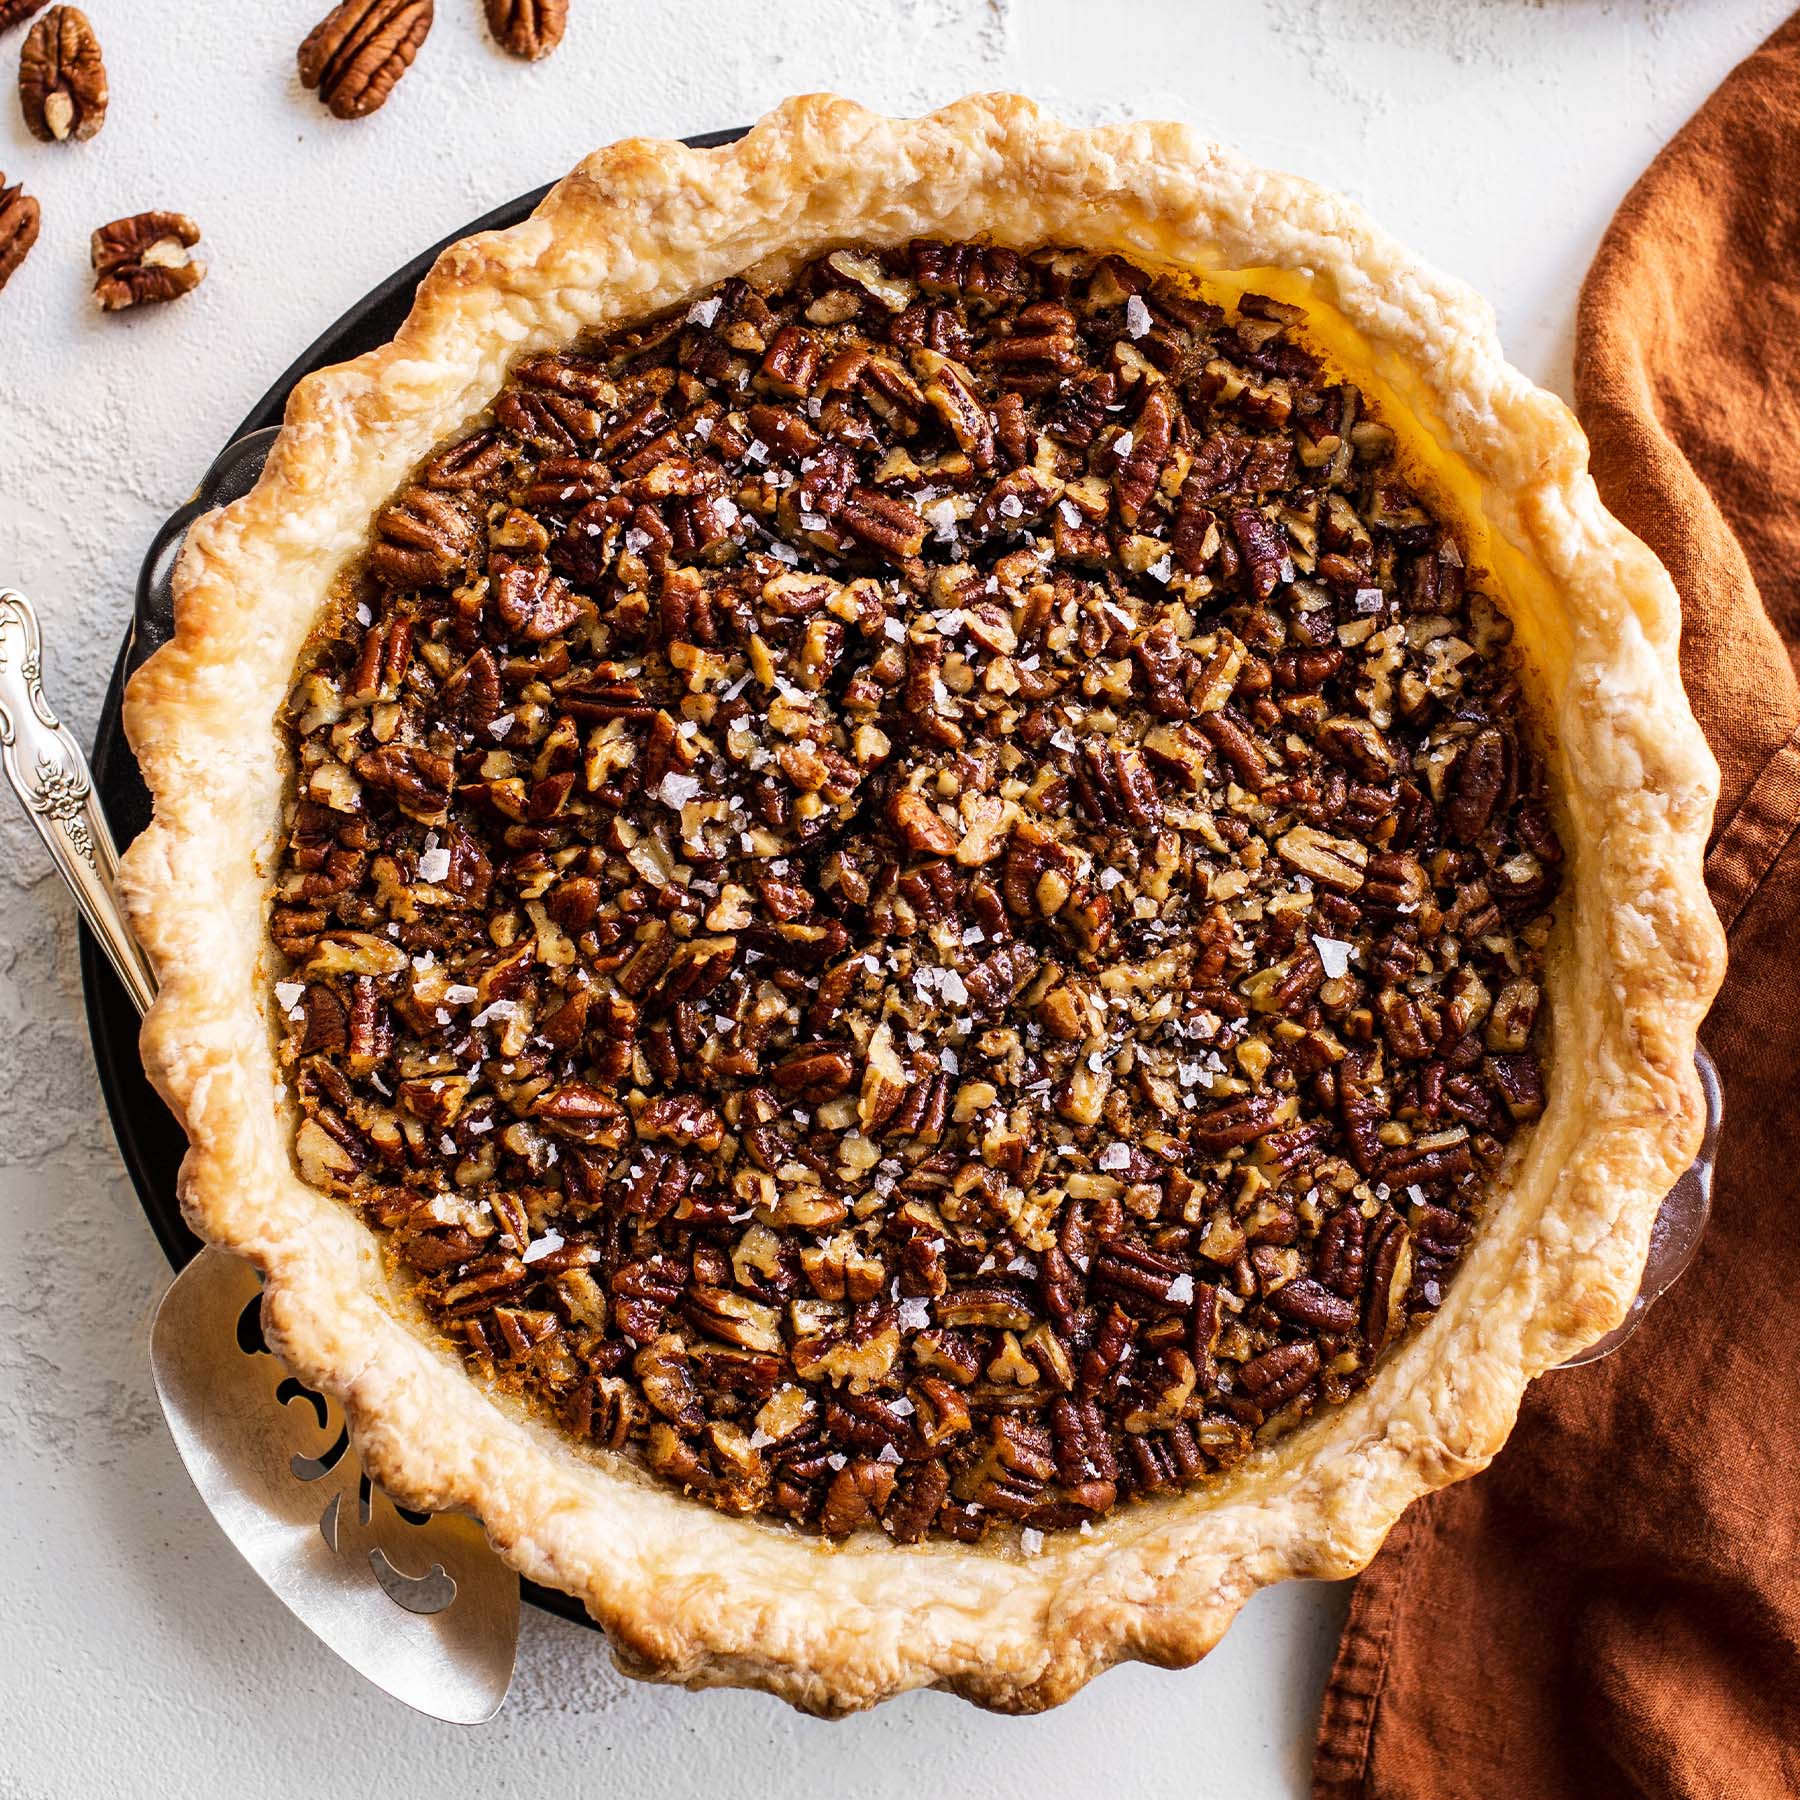 a whole pecan pie from the top, unsliced and still in its glass pie pan.